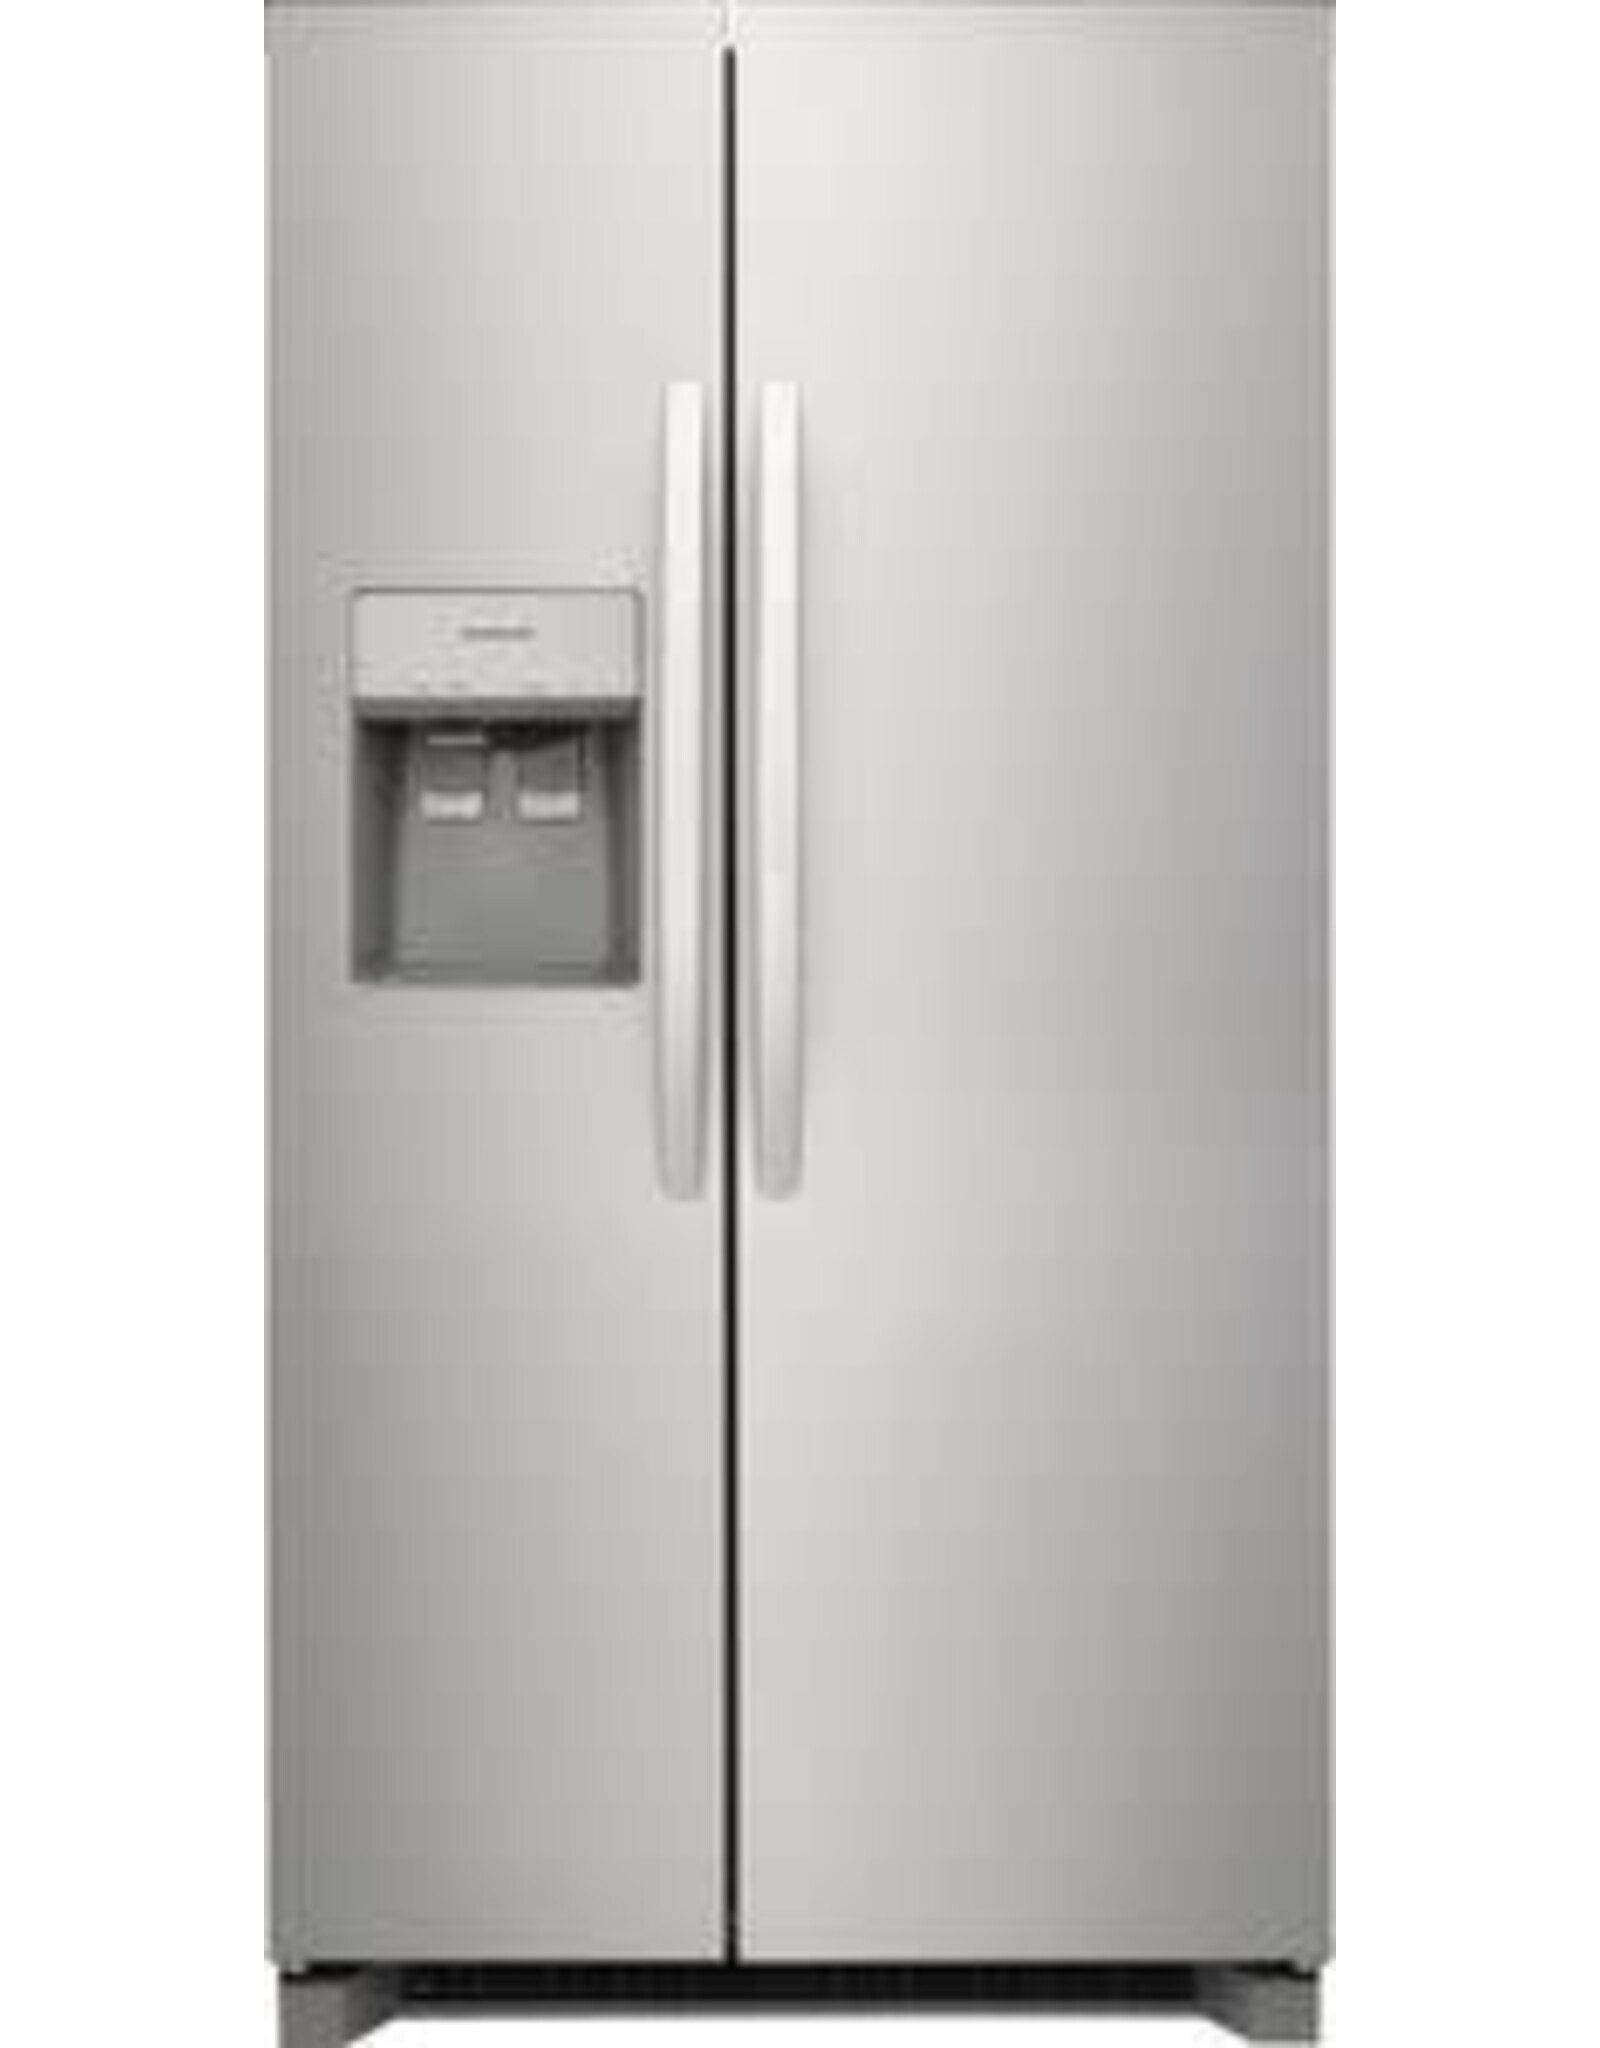 FRSC2333AS  Frigidaire 36.1 in. 22.3 cu. ft. Counter Depth Side-by-Side Refrigerator in Stainless Steel